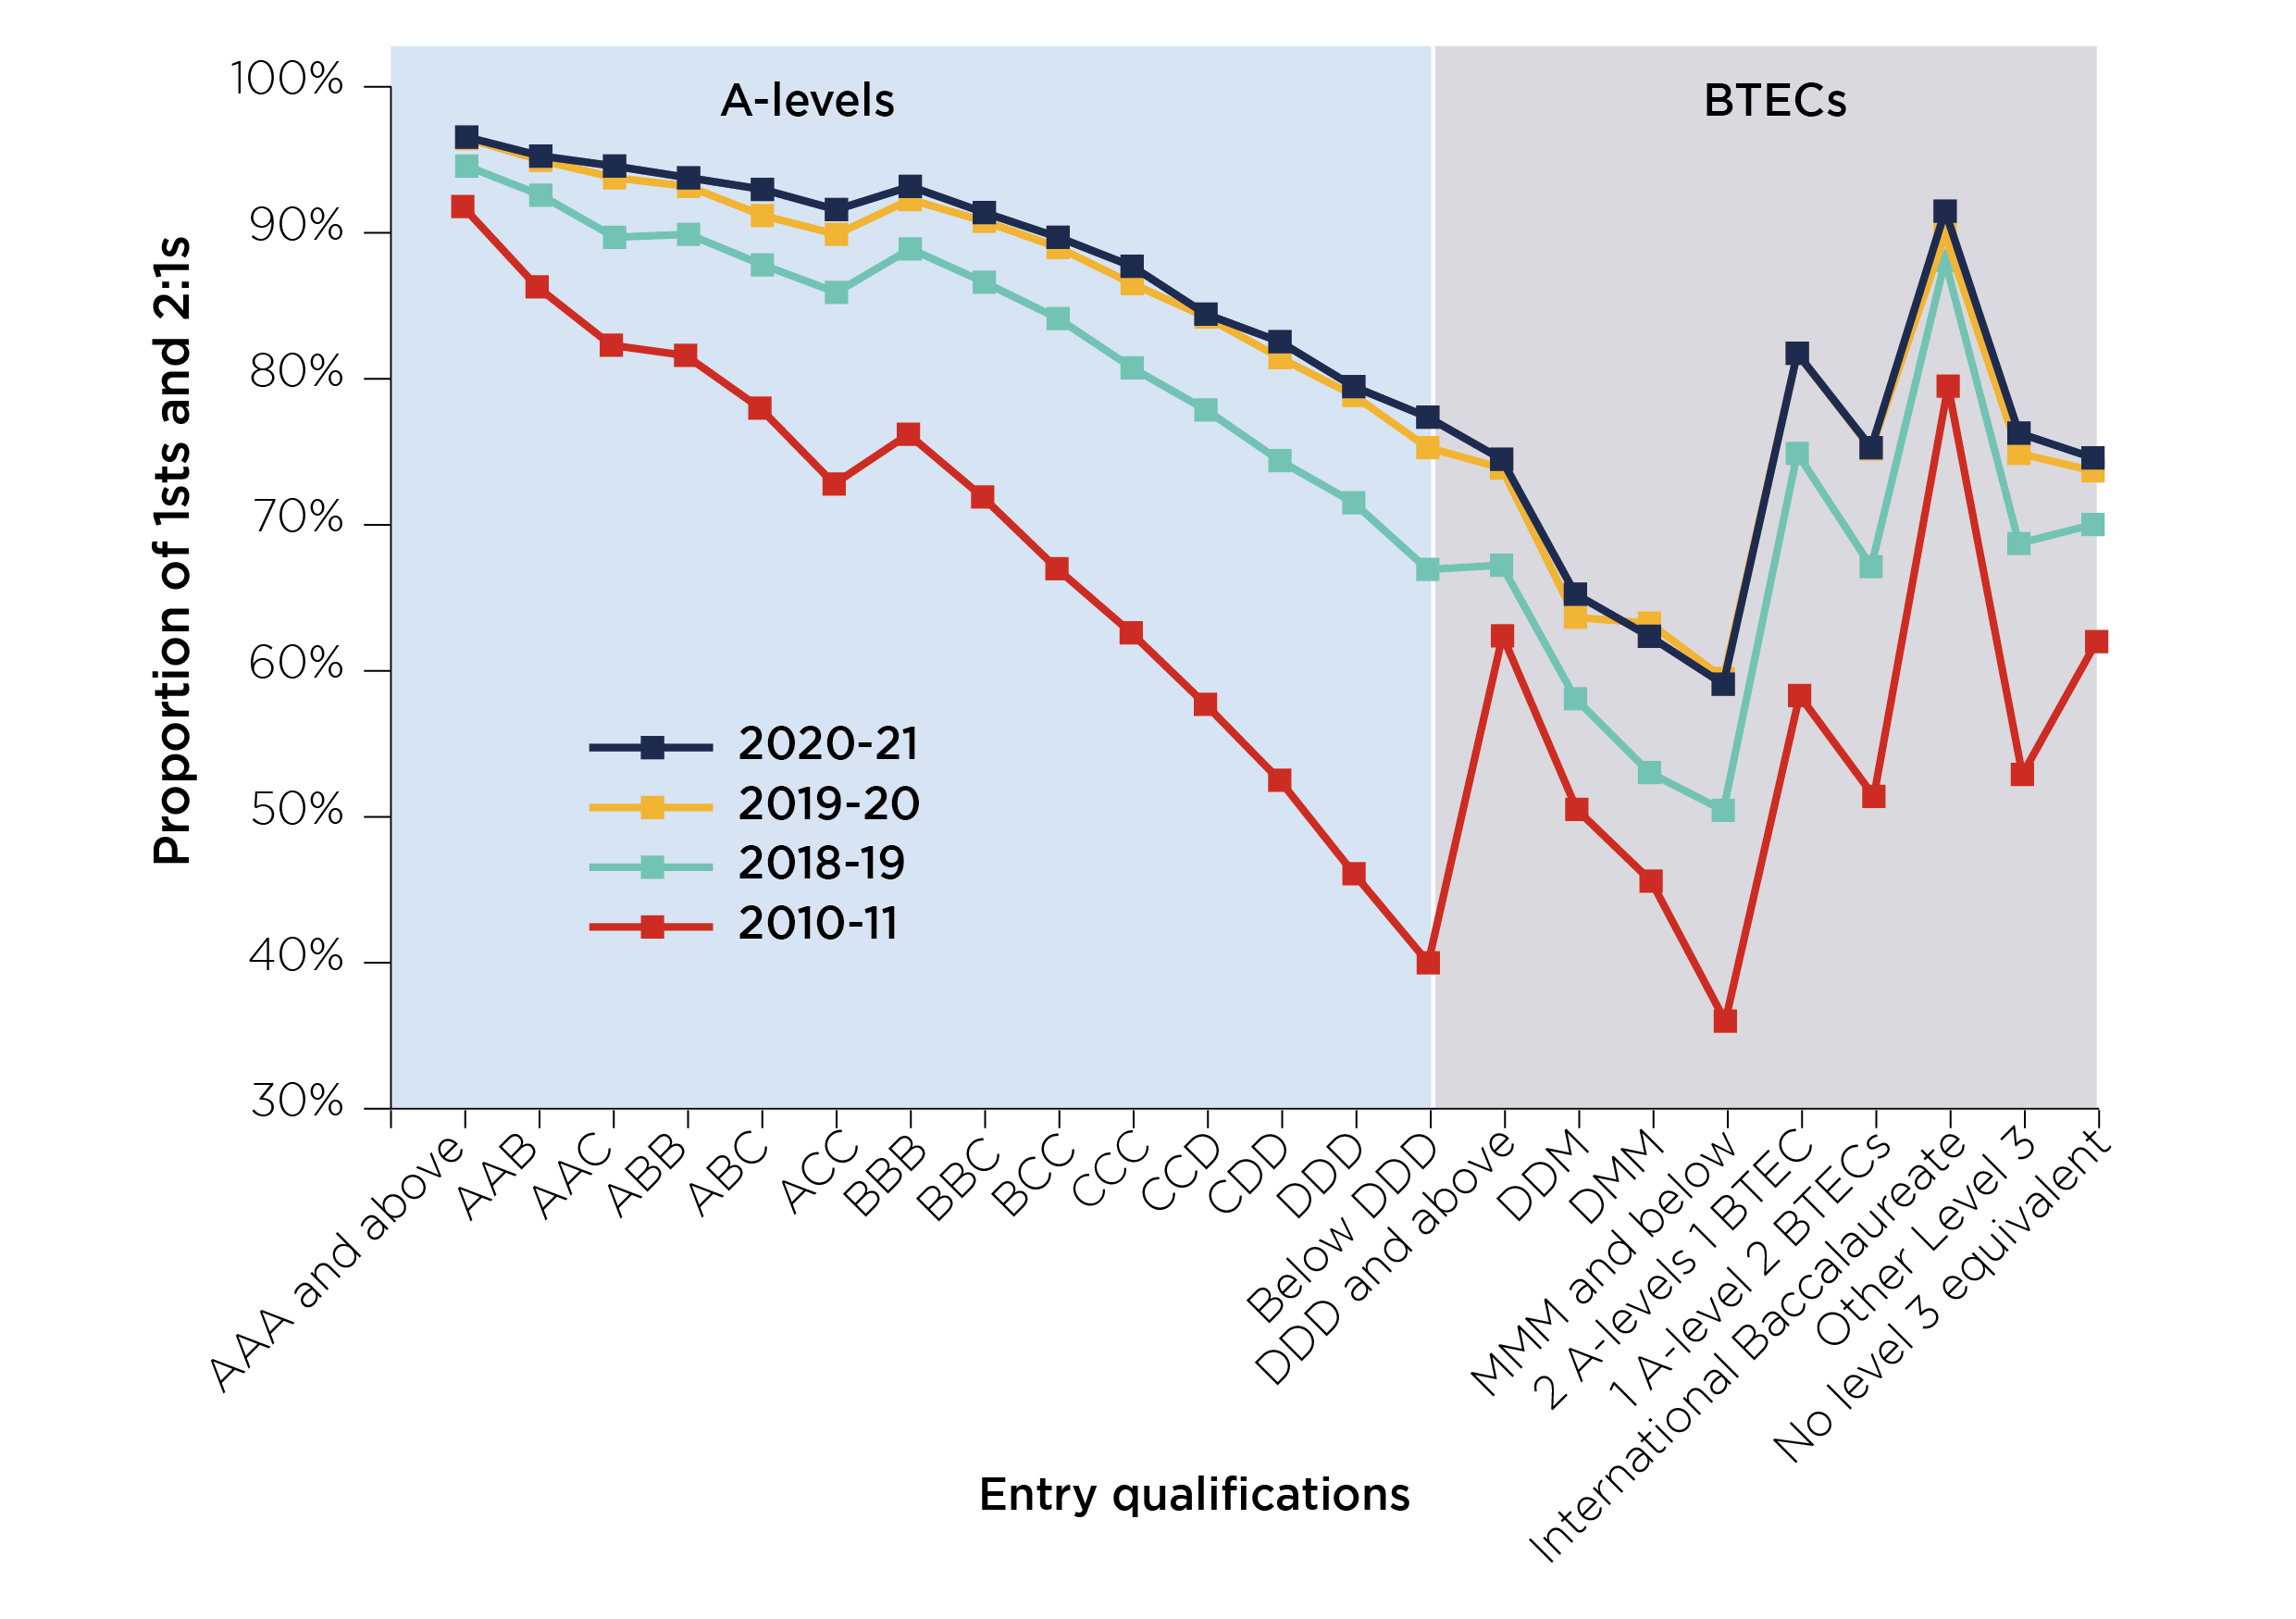 Figure 4: Degree attainment by entry qualifications for academic years 2010-11 and 2018-19 to 2020-21